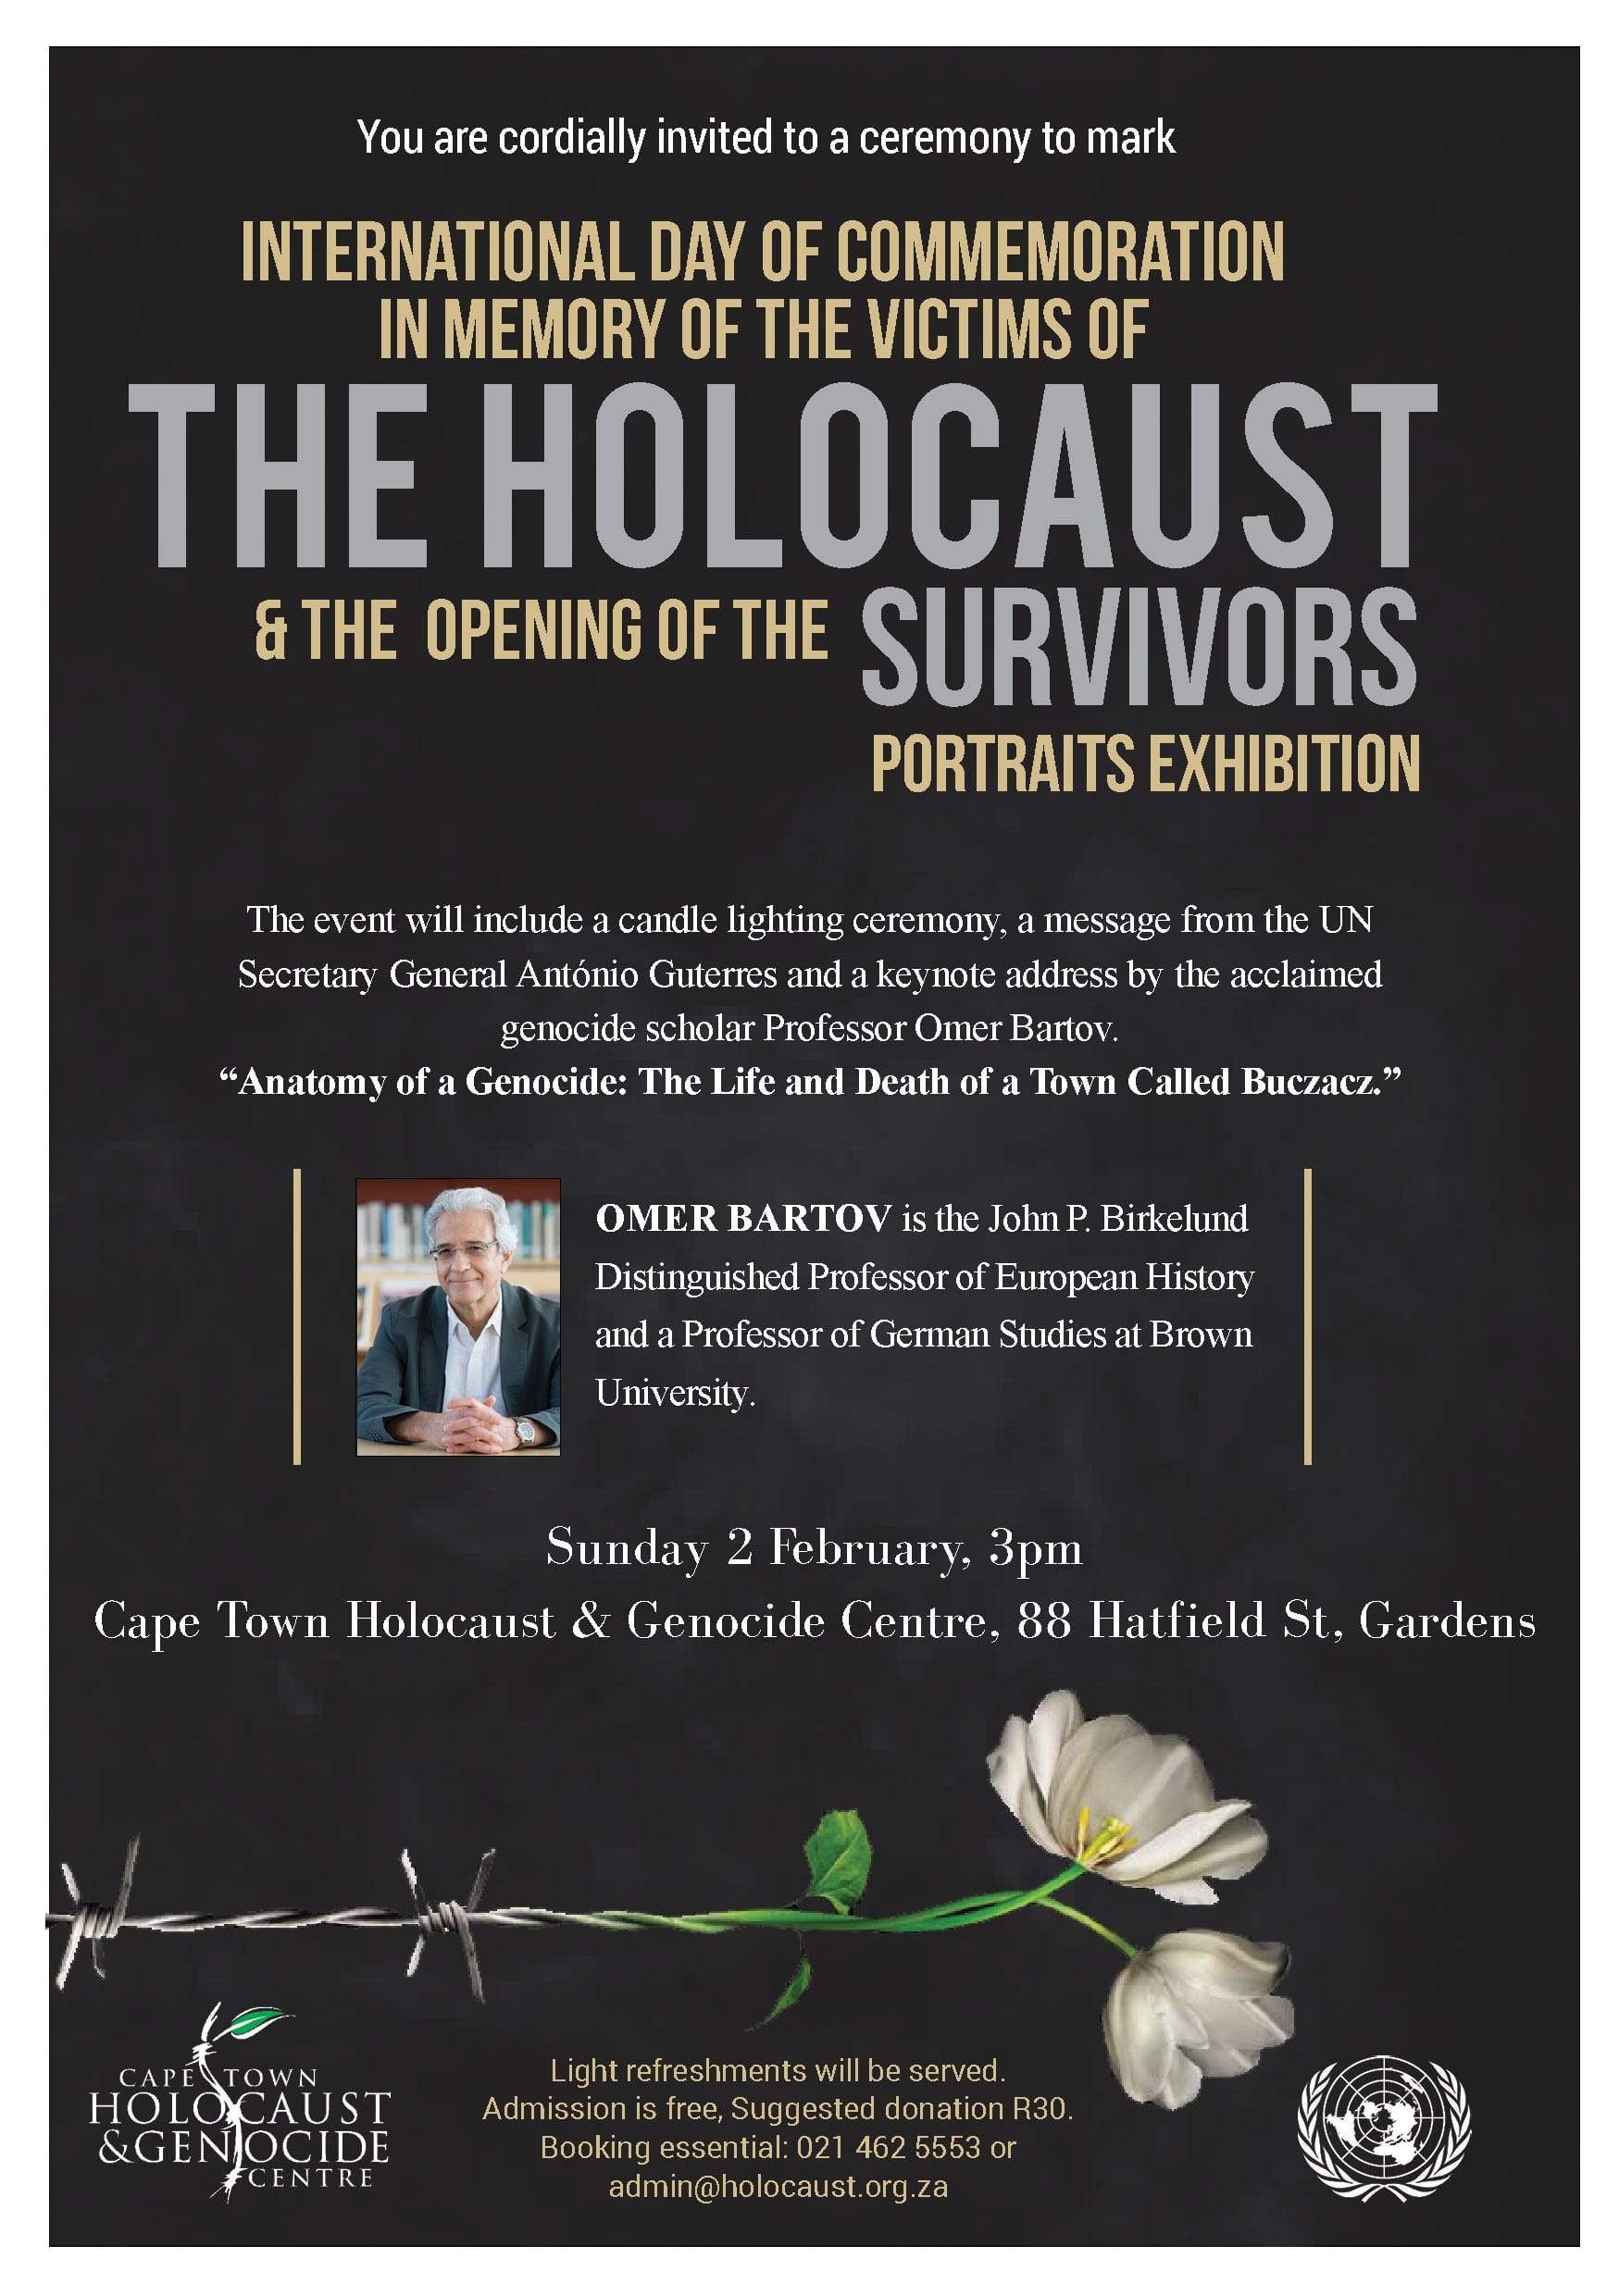 Holocaust Memorial Day and the Survivors potraits exhibition opening CTHGC